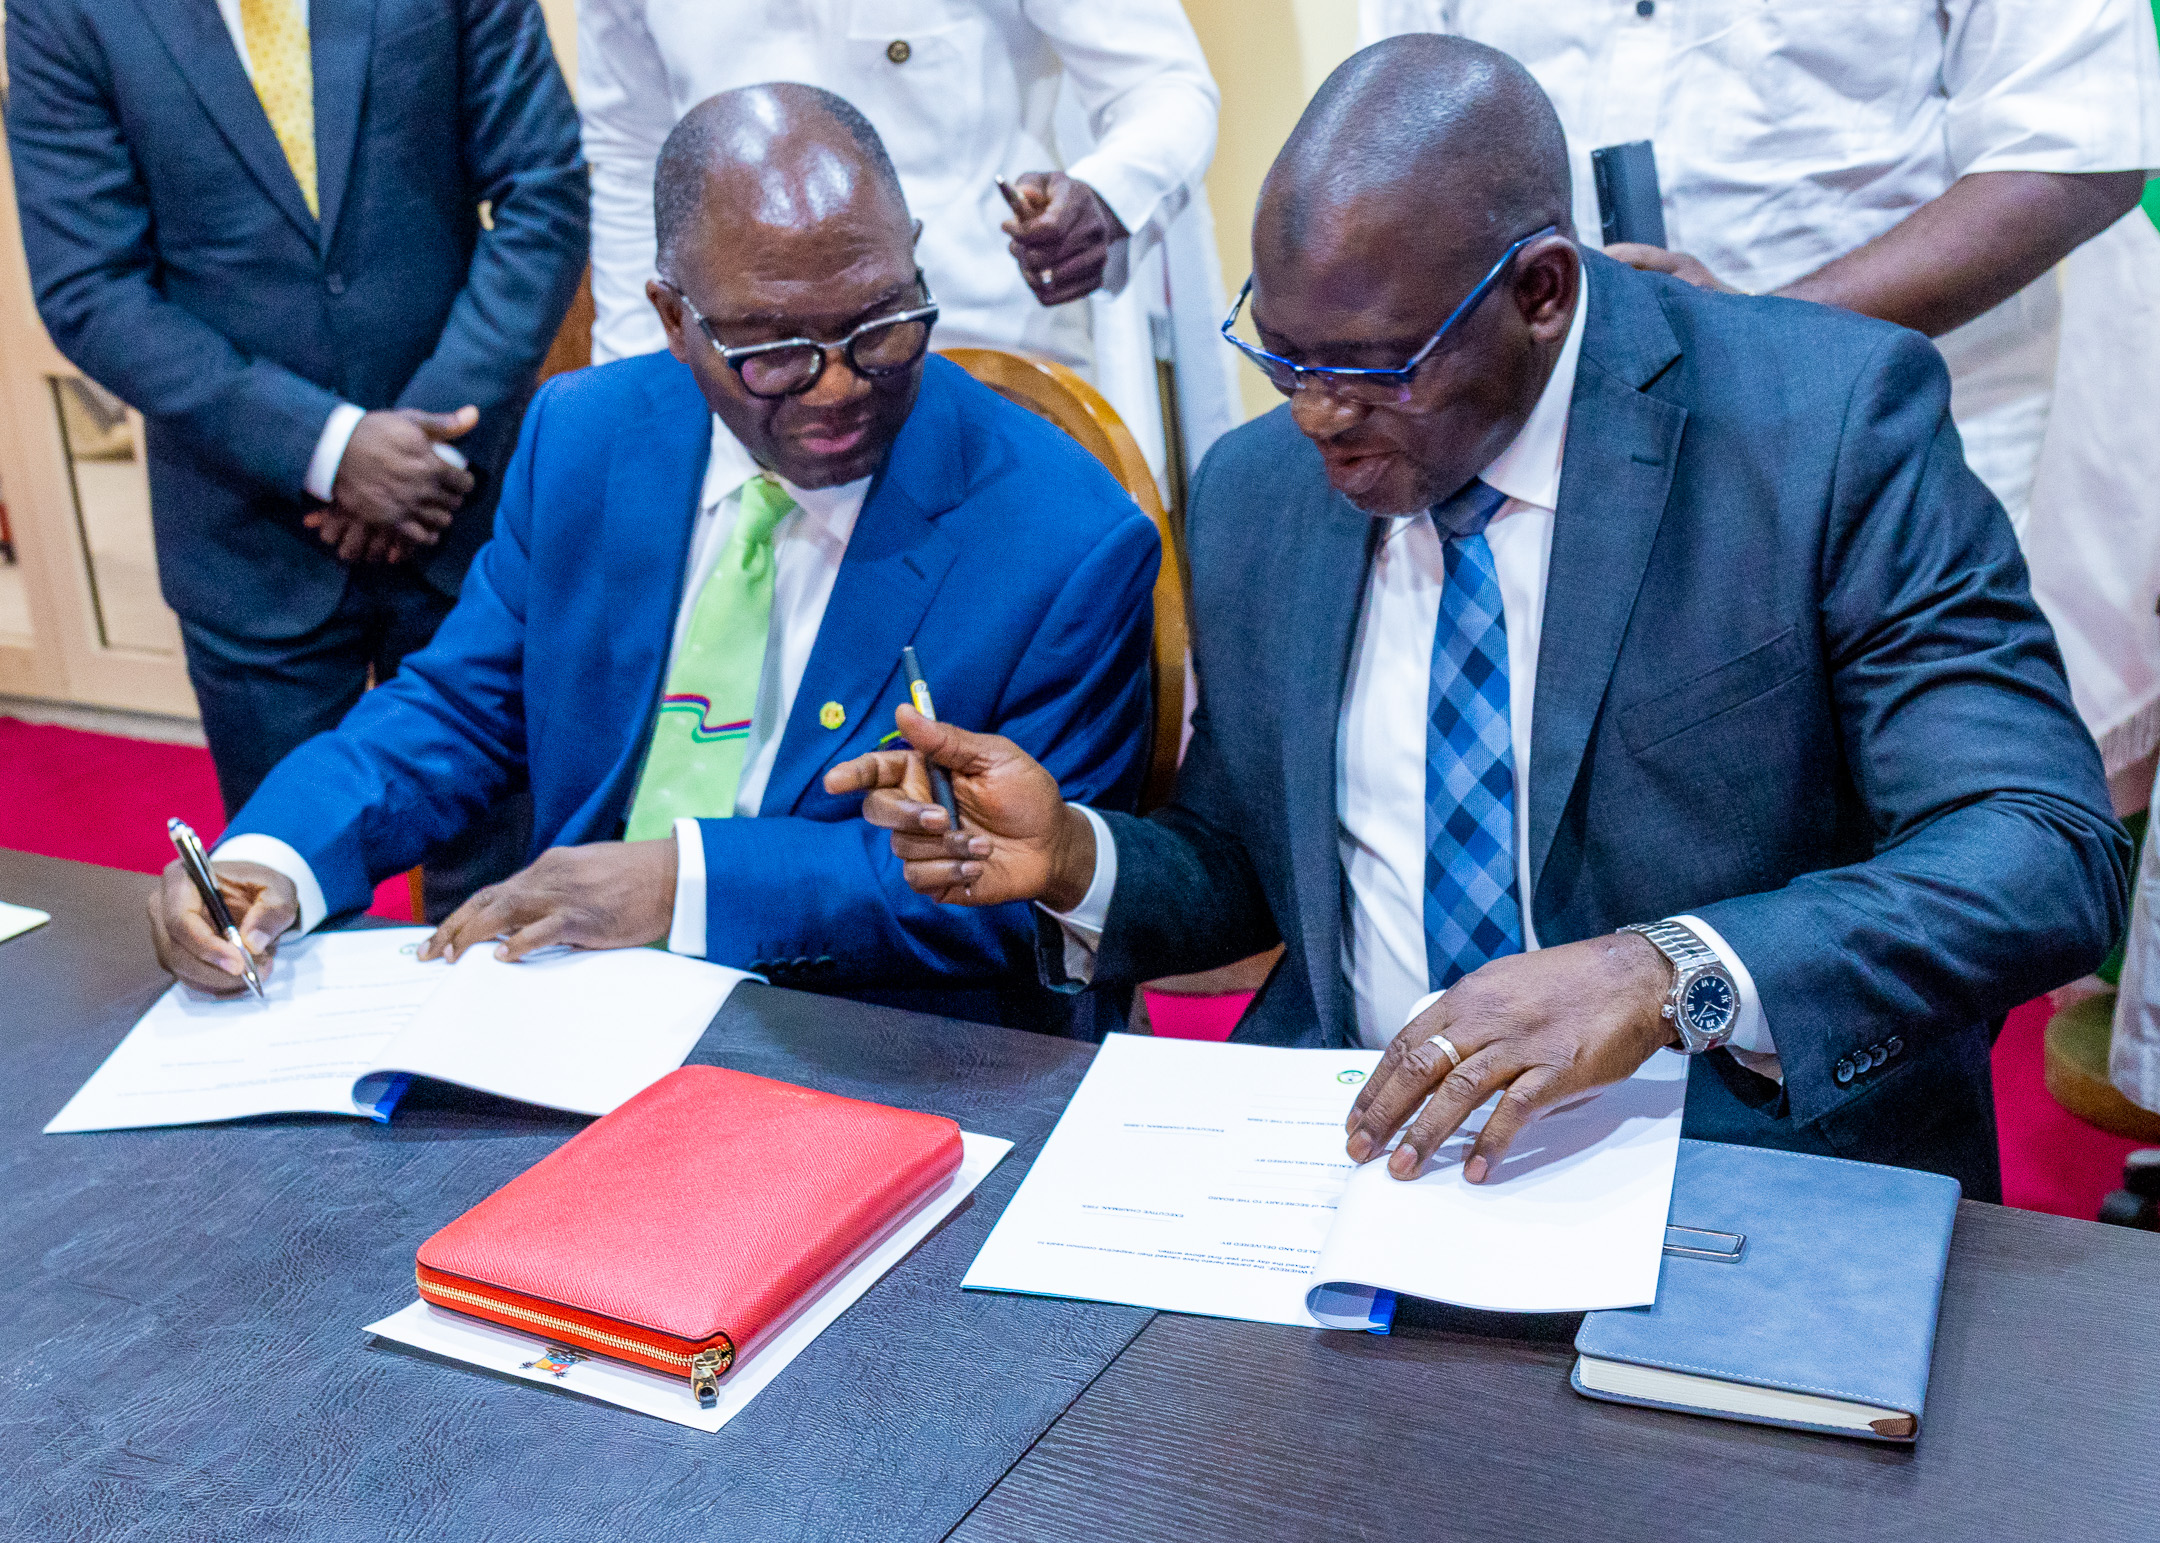 (L-R) Executive Chairman of the Lagos State Internal Revenue Service, Ayodele Subair and Executive Chairman, FIRS, Muhammad Nami during the signing of Memorandum of Understanding (MoU) between Federal Inland Revenue Service (FIRS) and Lagos State Internal Revenue Service, on collaboration on Exchange of Information and implementation of Joint Tax Audit and Investigation Exercise, at the State House, Marina, Lagos State. 6th February 2023.